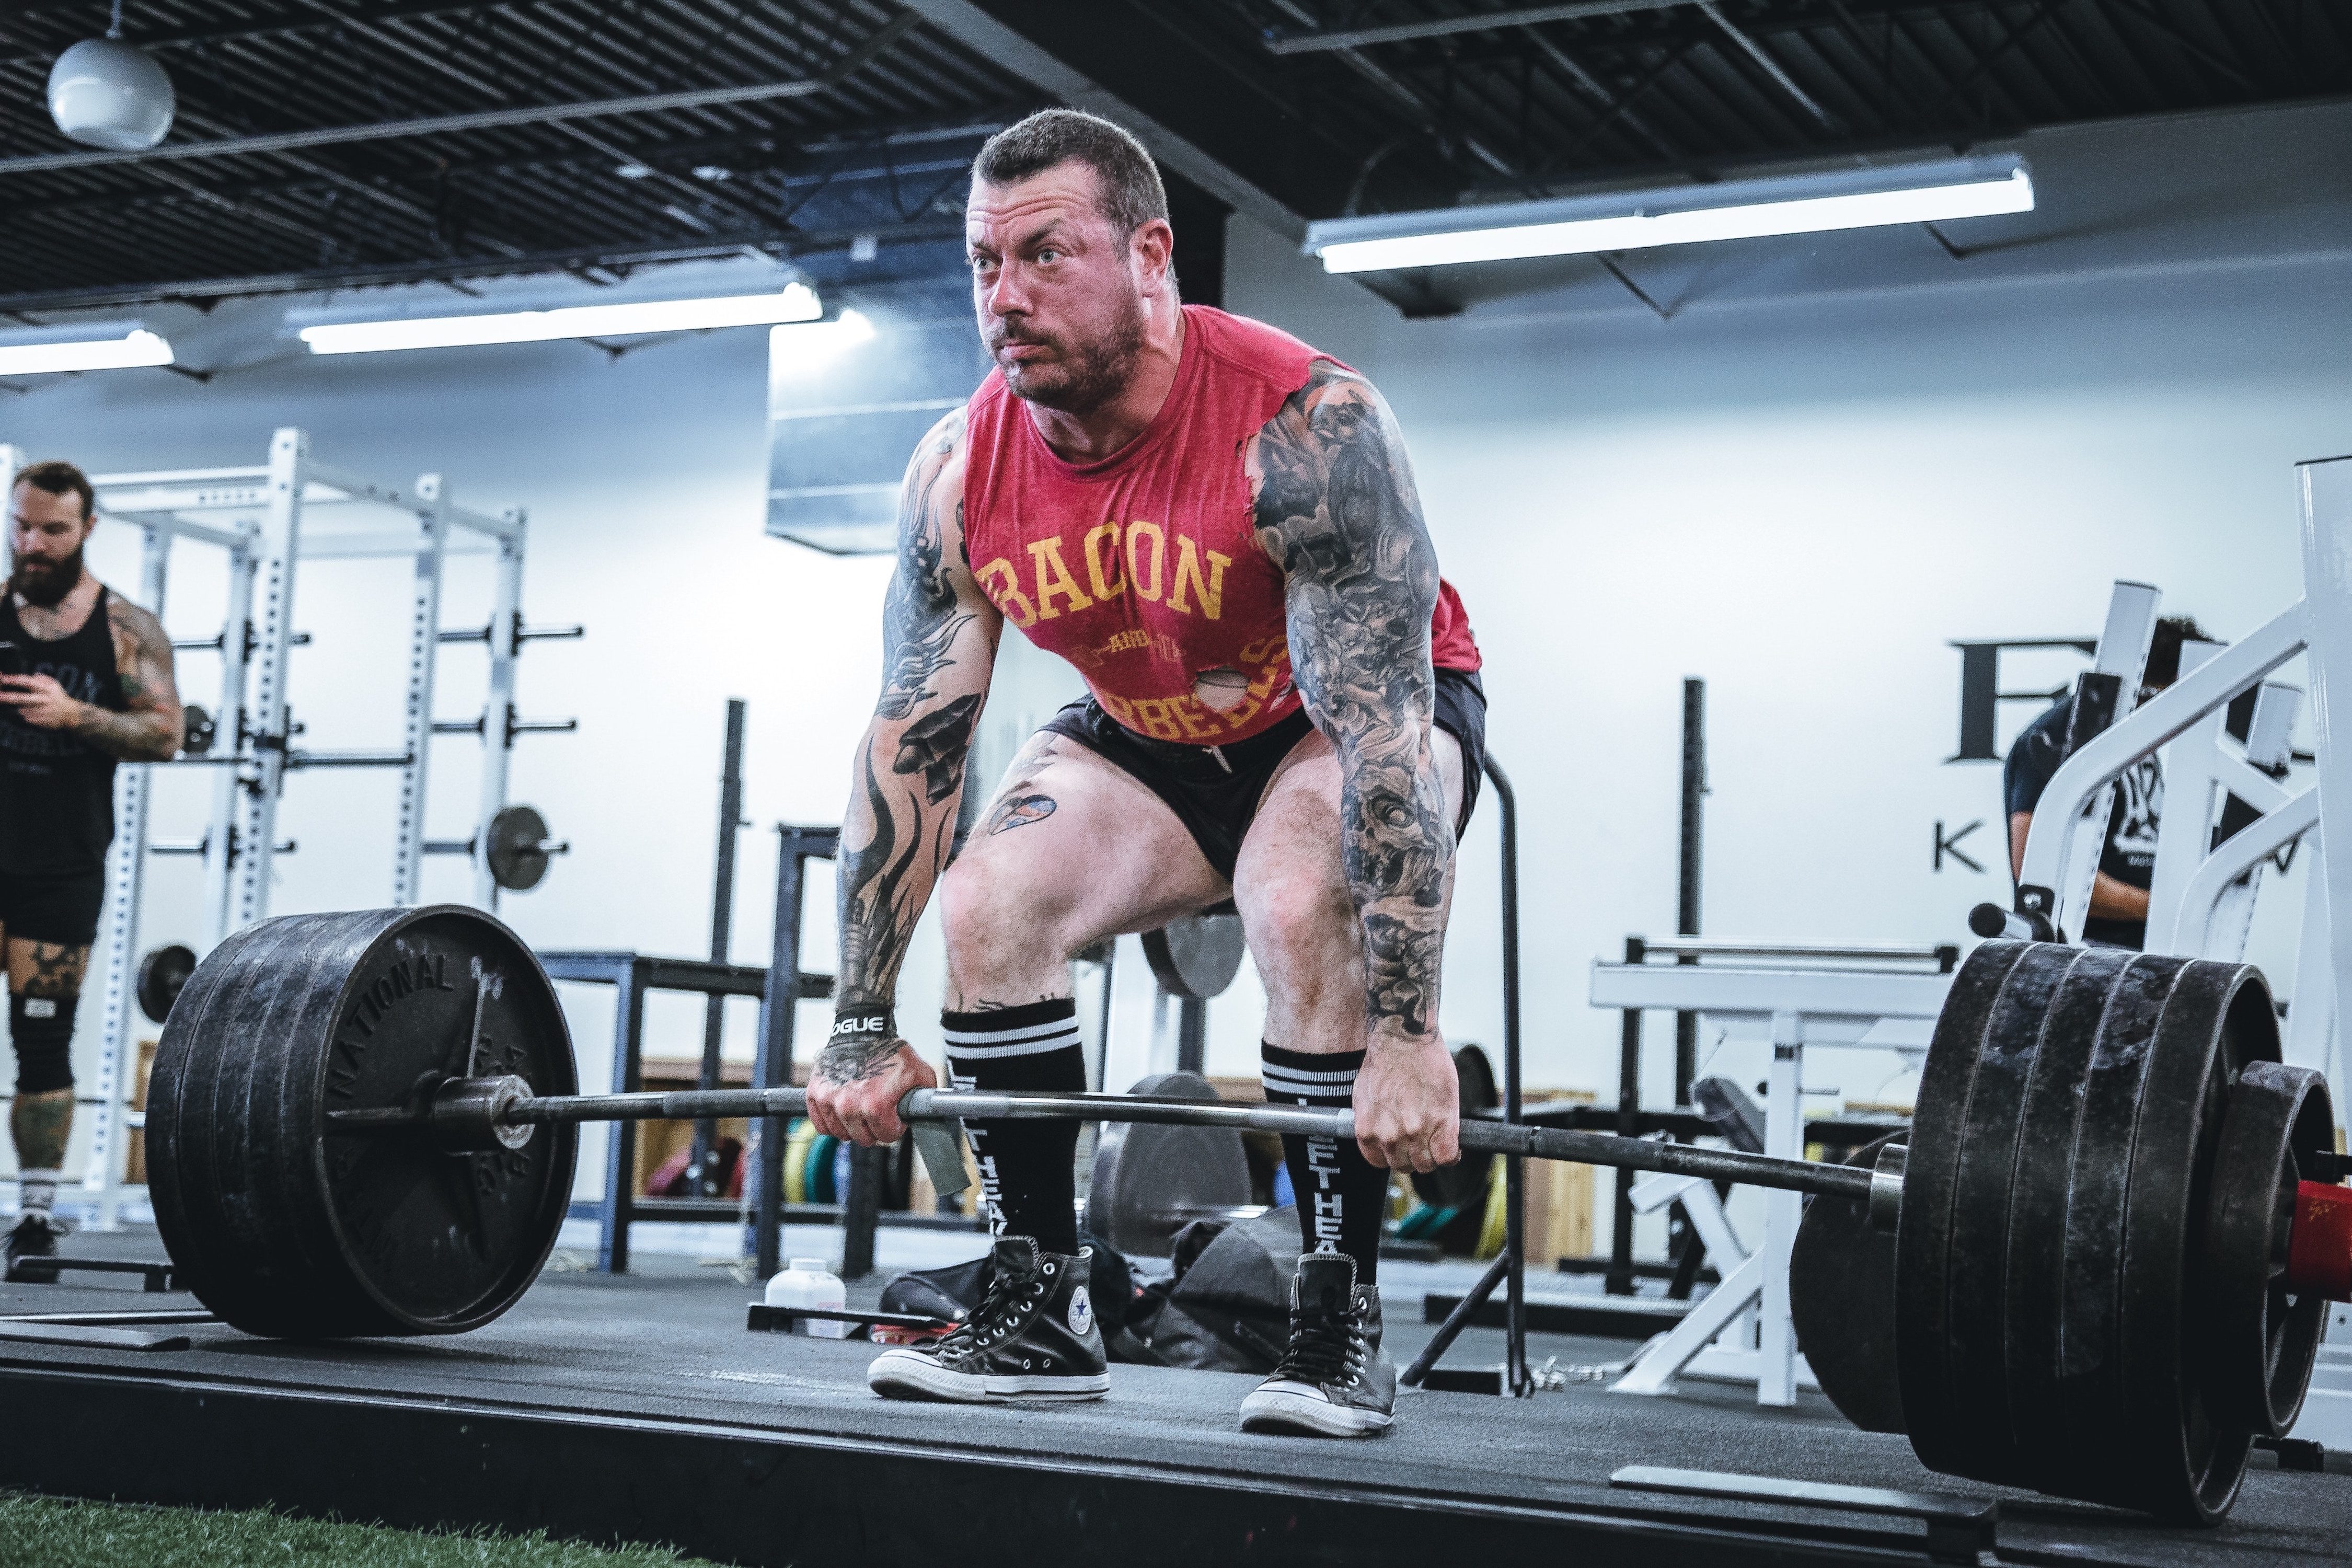 A large tattooed man deadlifting enough weight to bend the bar in the conventional form.